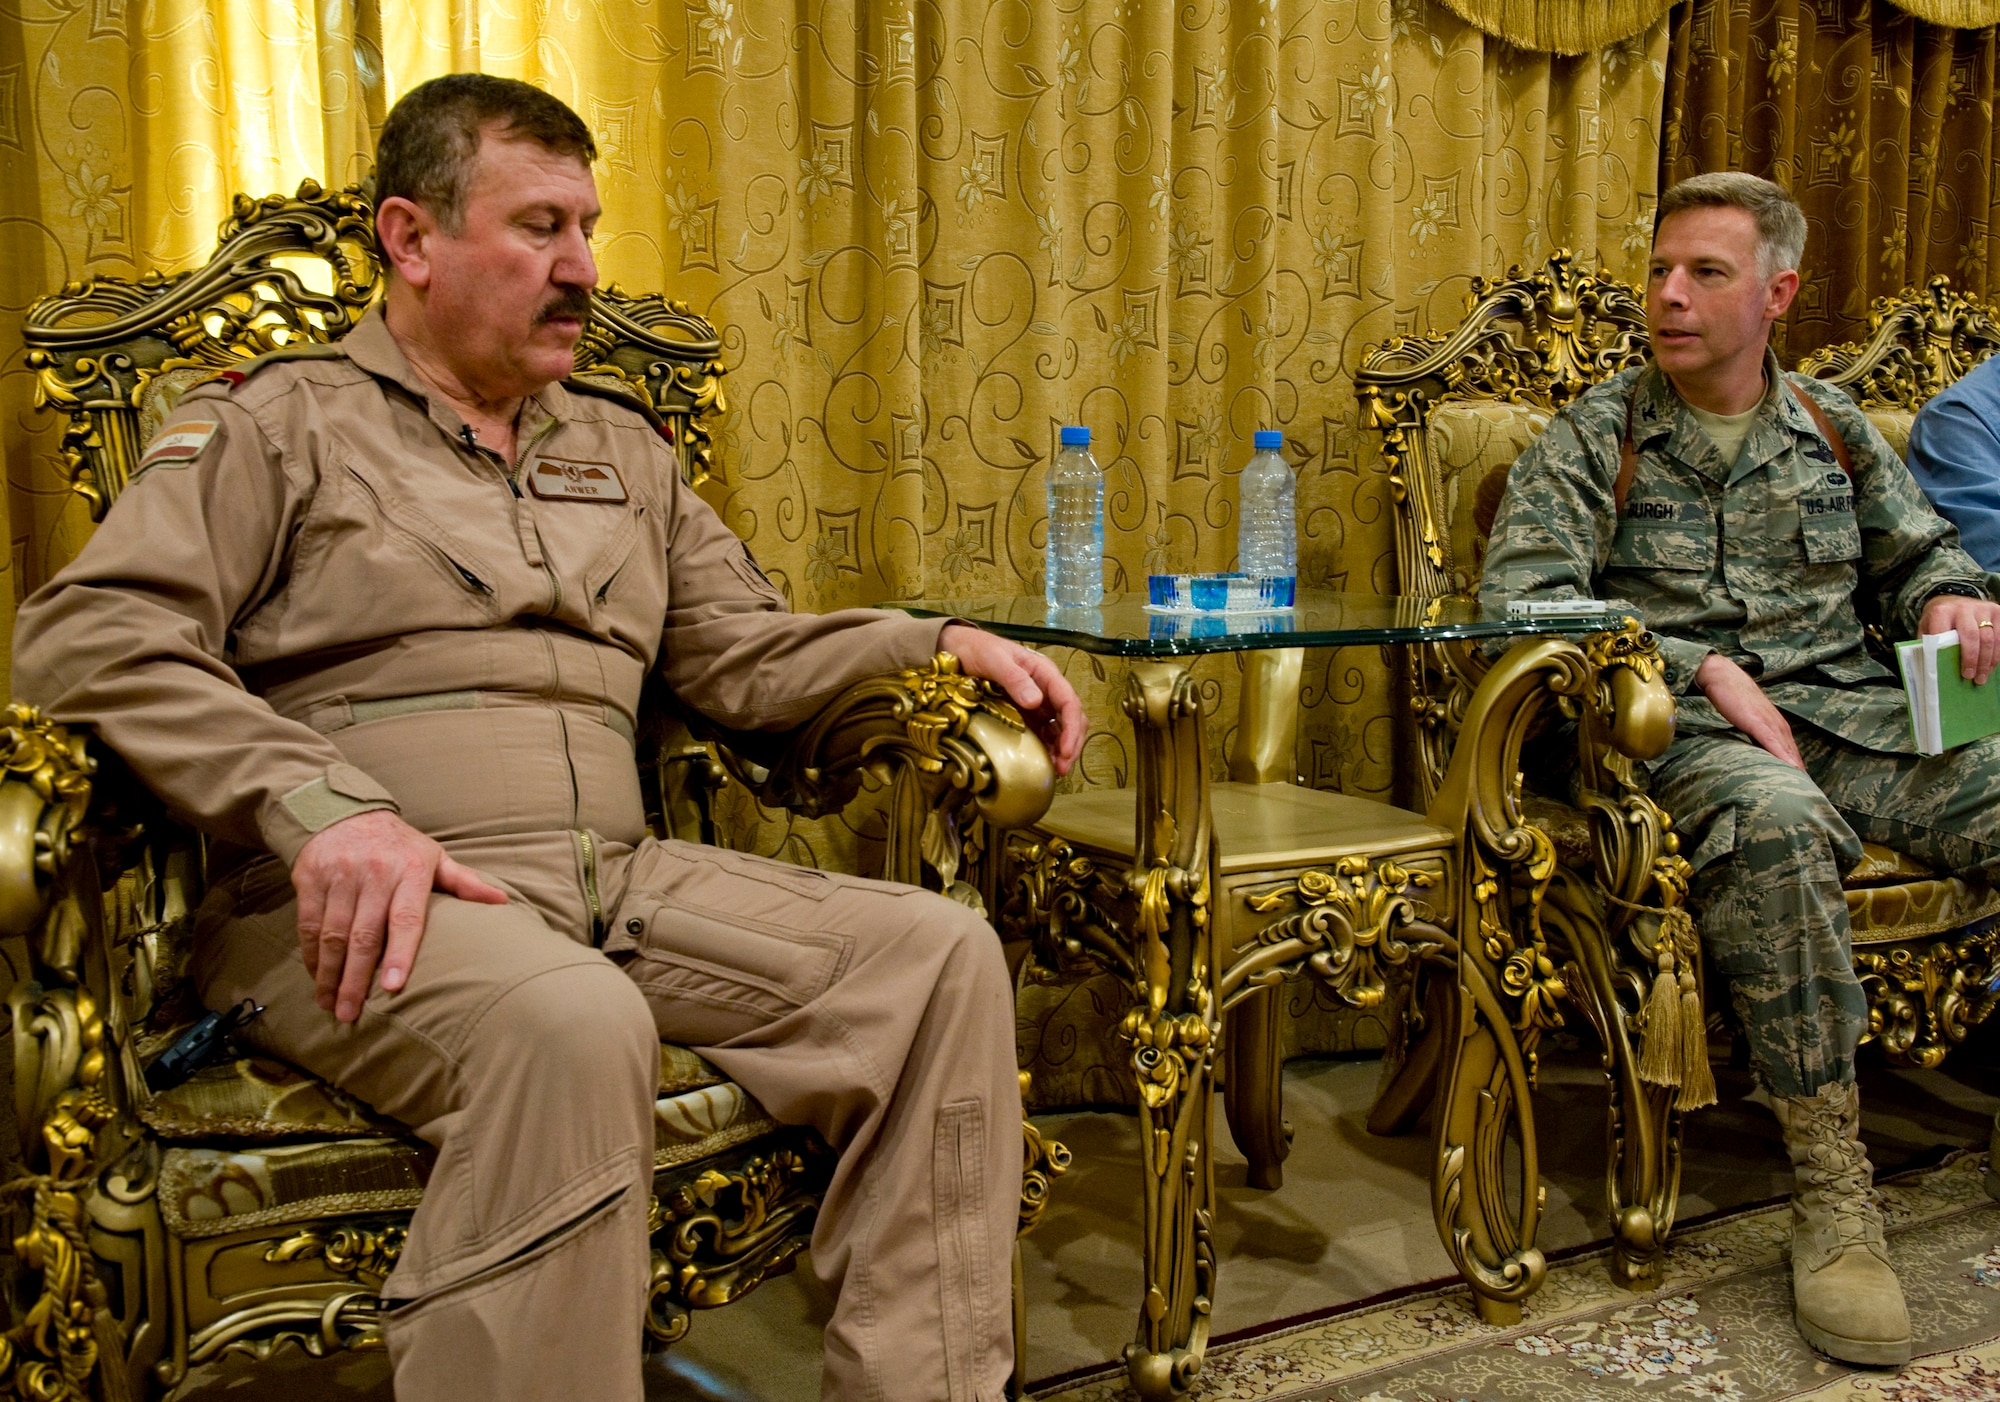 U.S. Air Force Col. Steven Burgh with the Office of Security Cooperation - Iraq meets with the Iraqi Air Force commander, General Anwar, to discuss current progress of the Iraqi Air Force, June 3, 2012 in Baghdad, Iraq. OSC - I in conjunction with the U.S. Embassy - Baghdad, the government of Iraq and international partners, conducts security cooperation in order to support Iraq's continued development into a sovereign stable and long-term self reliant strategic partner that contributes to peace and security in the region. (U.S. Air Force photo by Staff Sgt. Greg C. Biondo)